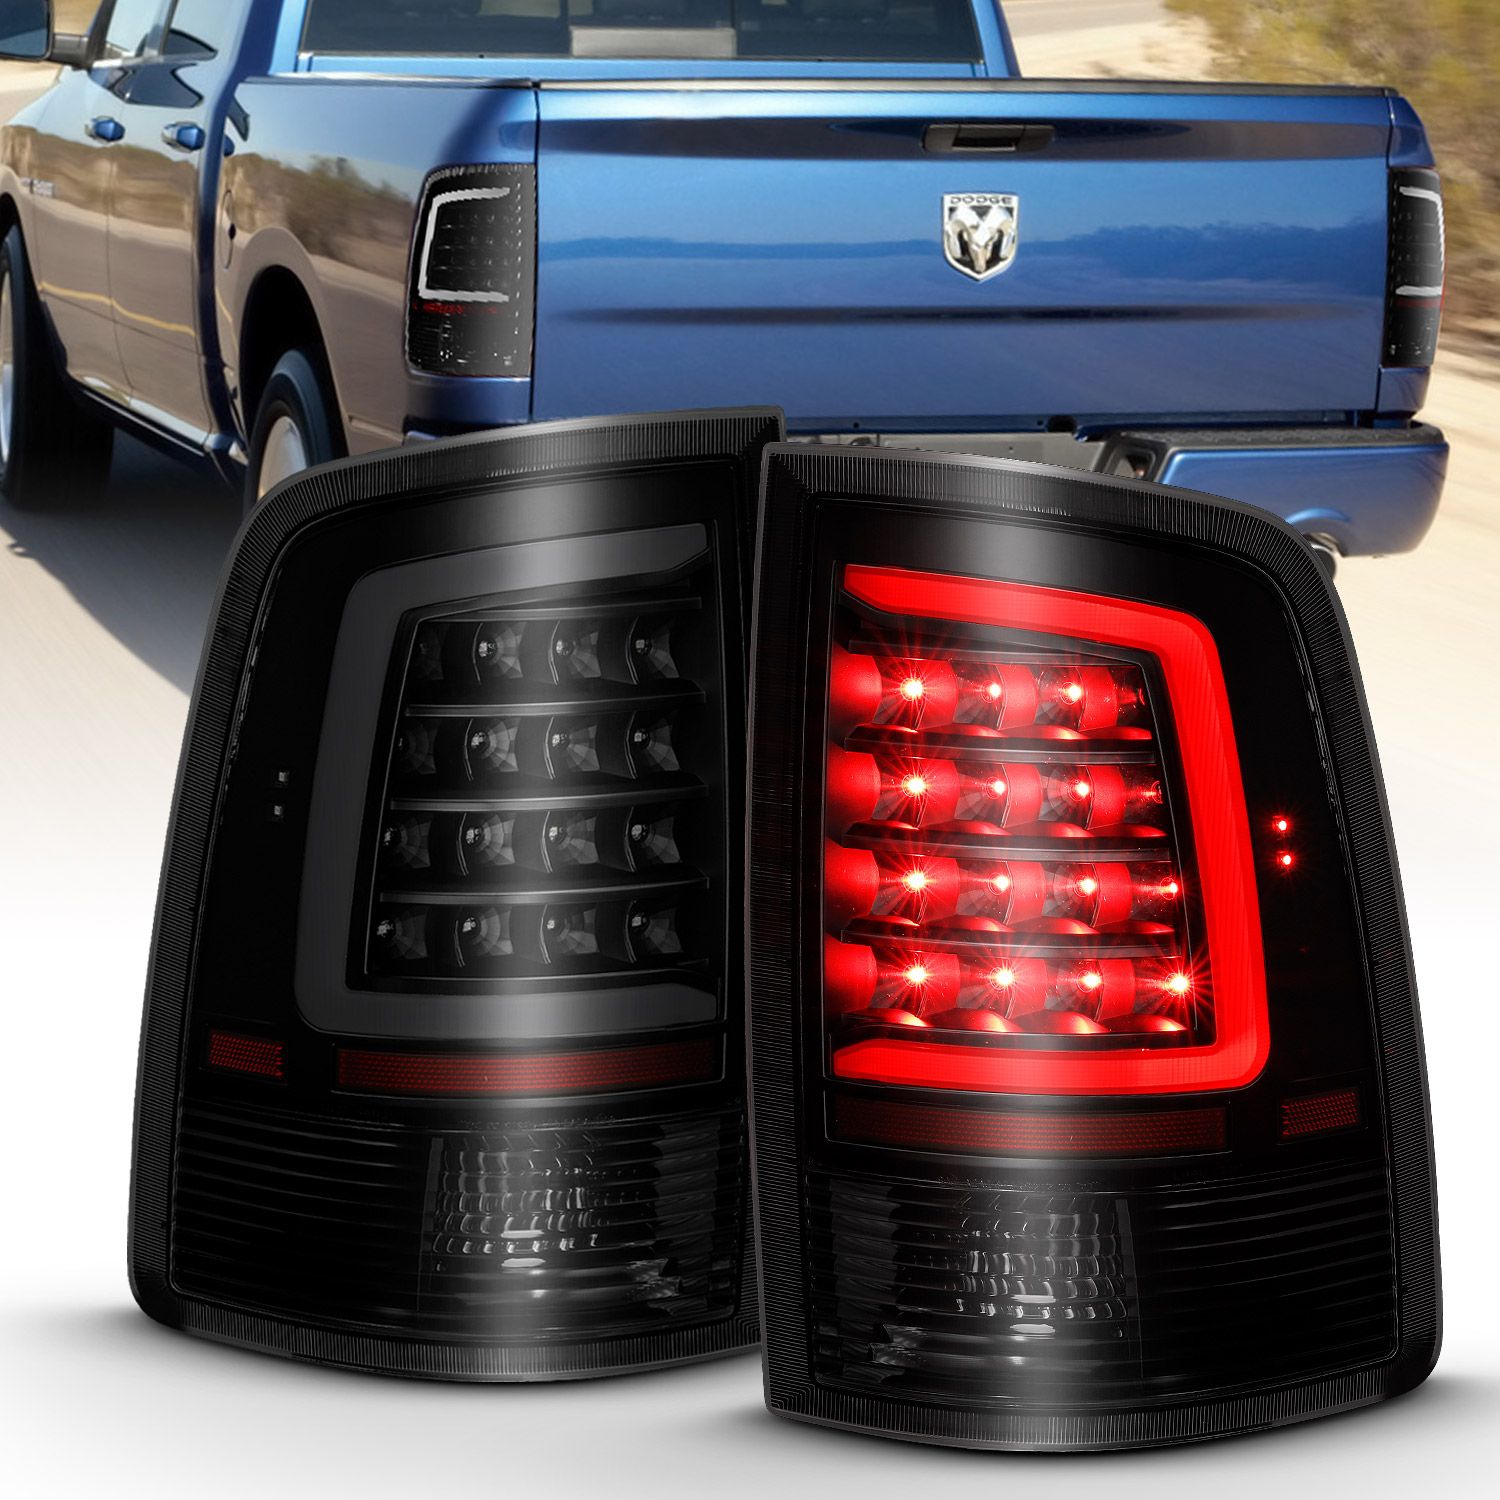 2009-2022 DODGE RAM 1500/ 2010-2018 2500/3500 LED TAIL LIGHTS CHROME CLEAR W/ C LIGHT BAR (NOT FOR MODELS WITH OE LED TAIL LIGHTS)